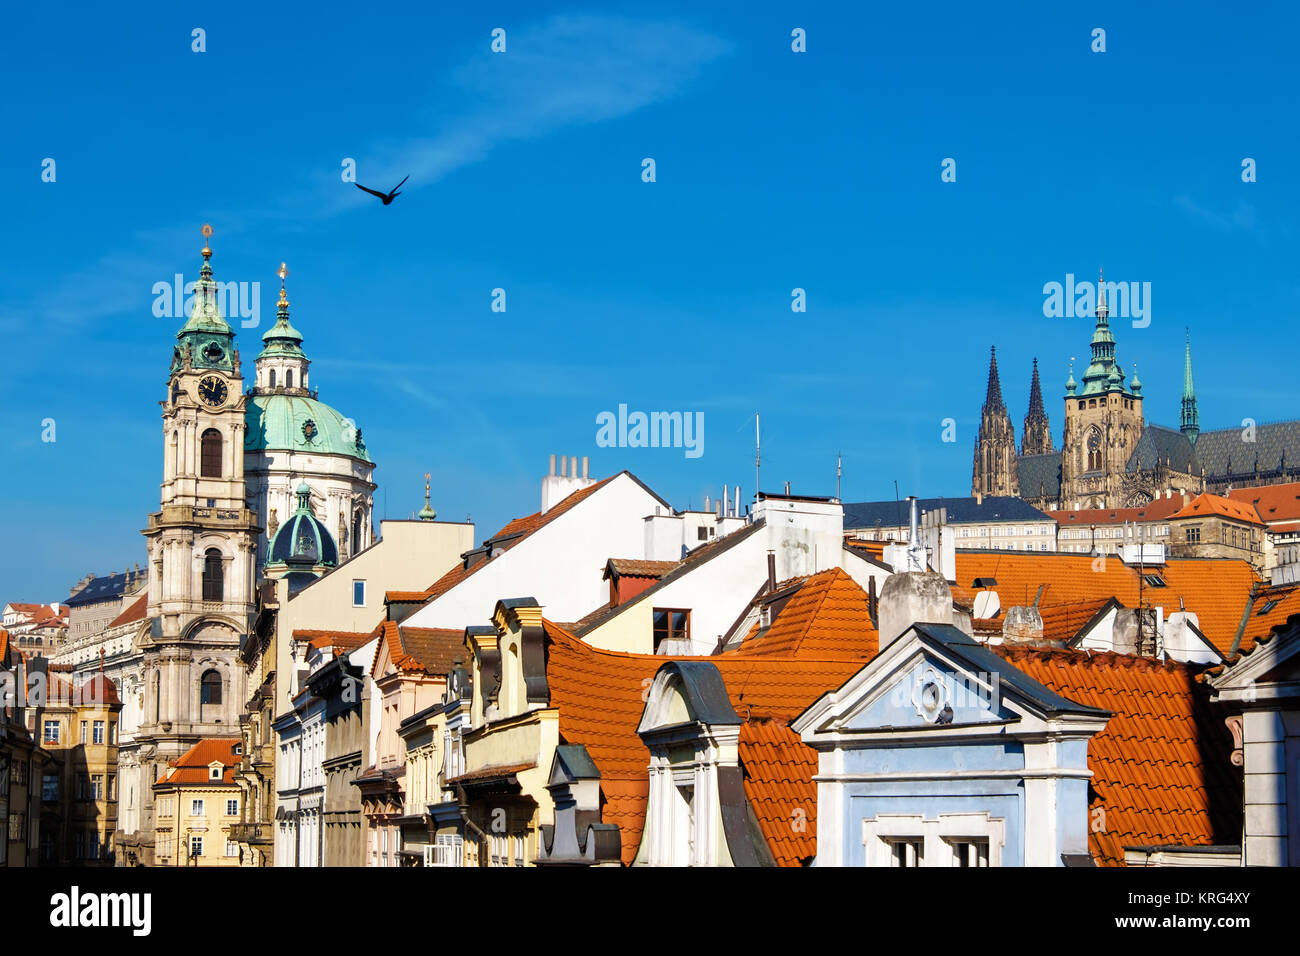 Prague, St. Nicolas church, St. Vitus Cathedral and and orange tiled roofs on a bright day. Space for your text on the sky. Stock Photo